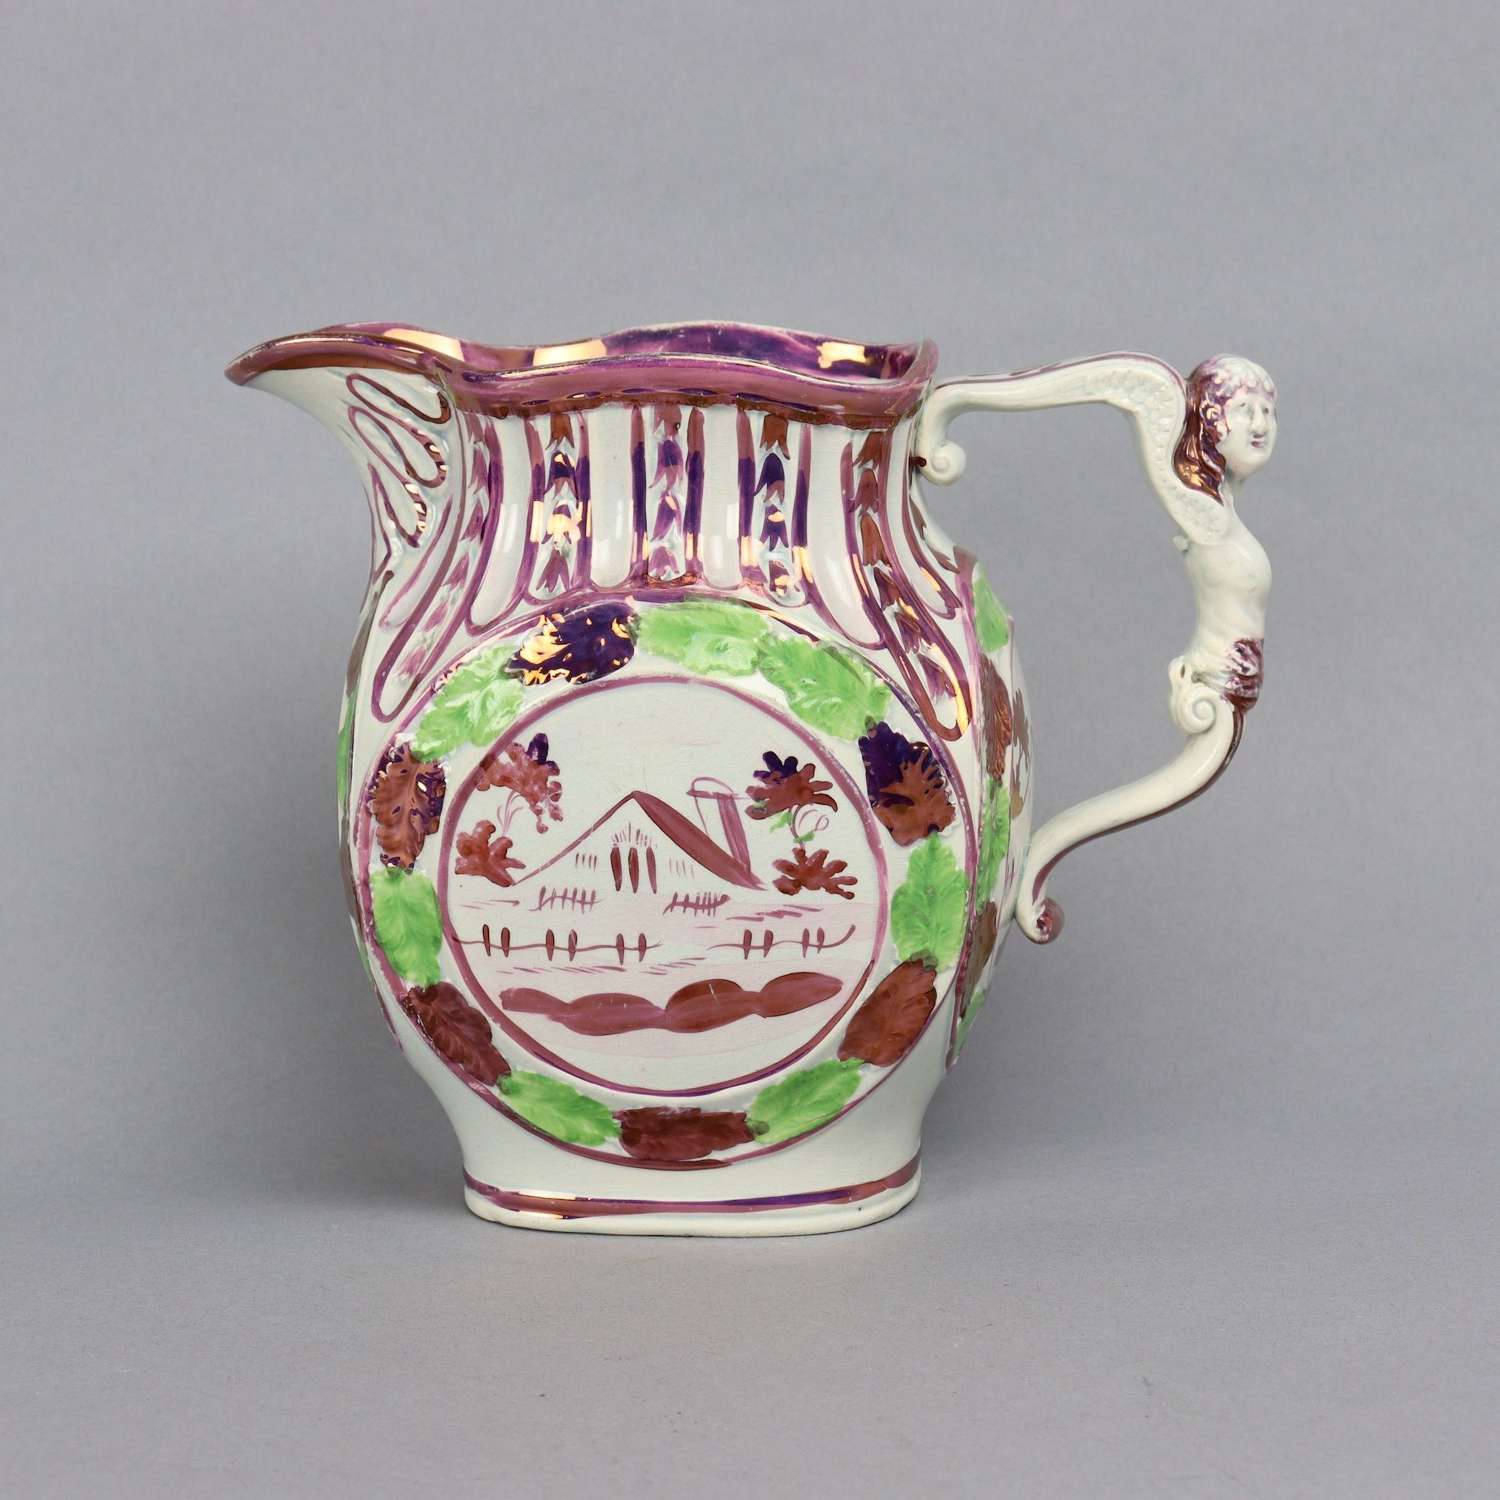 Jug with Rare Moulded Handle